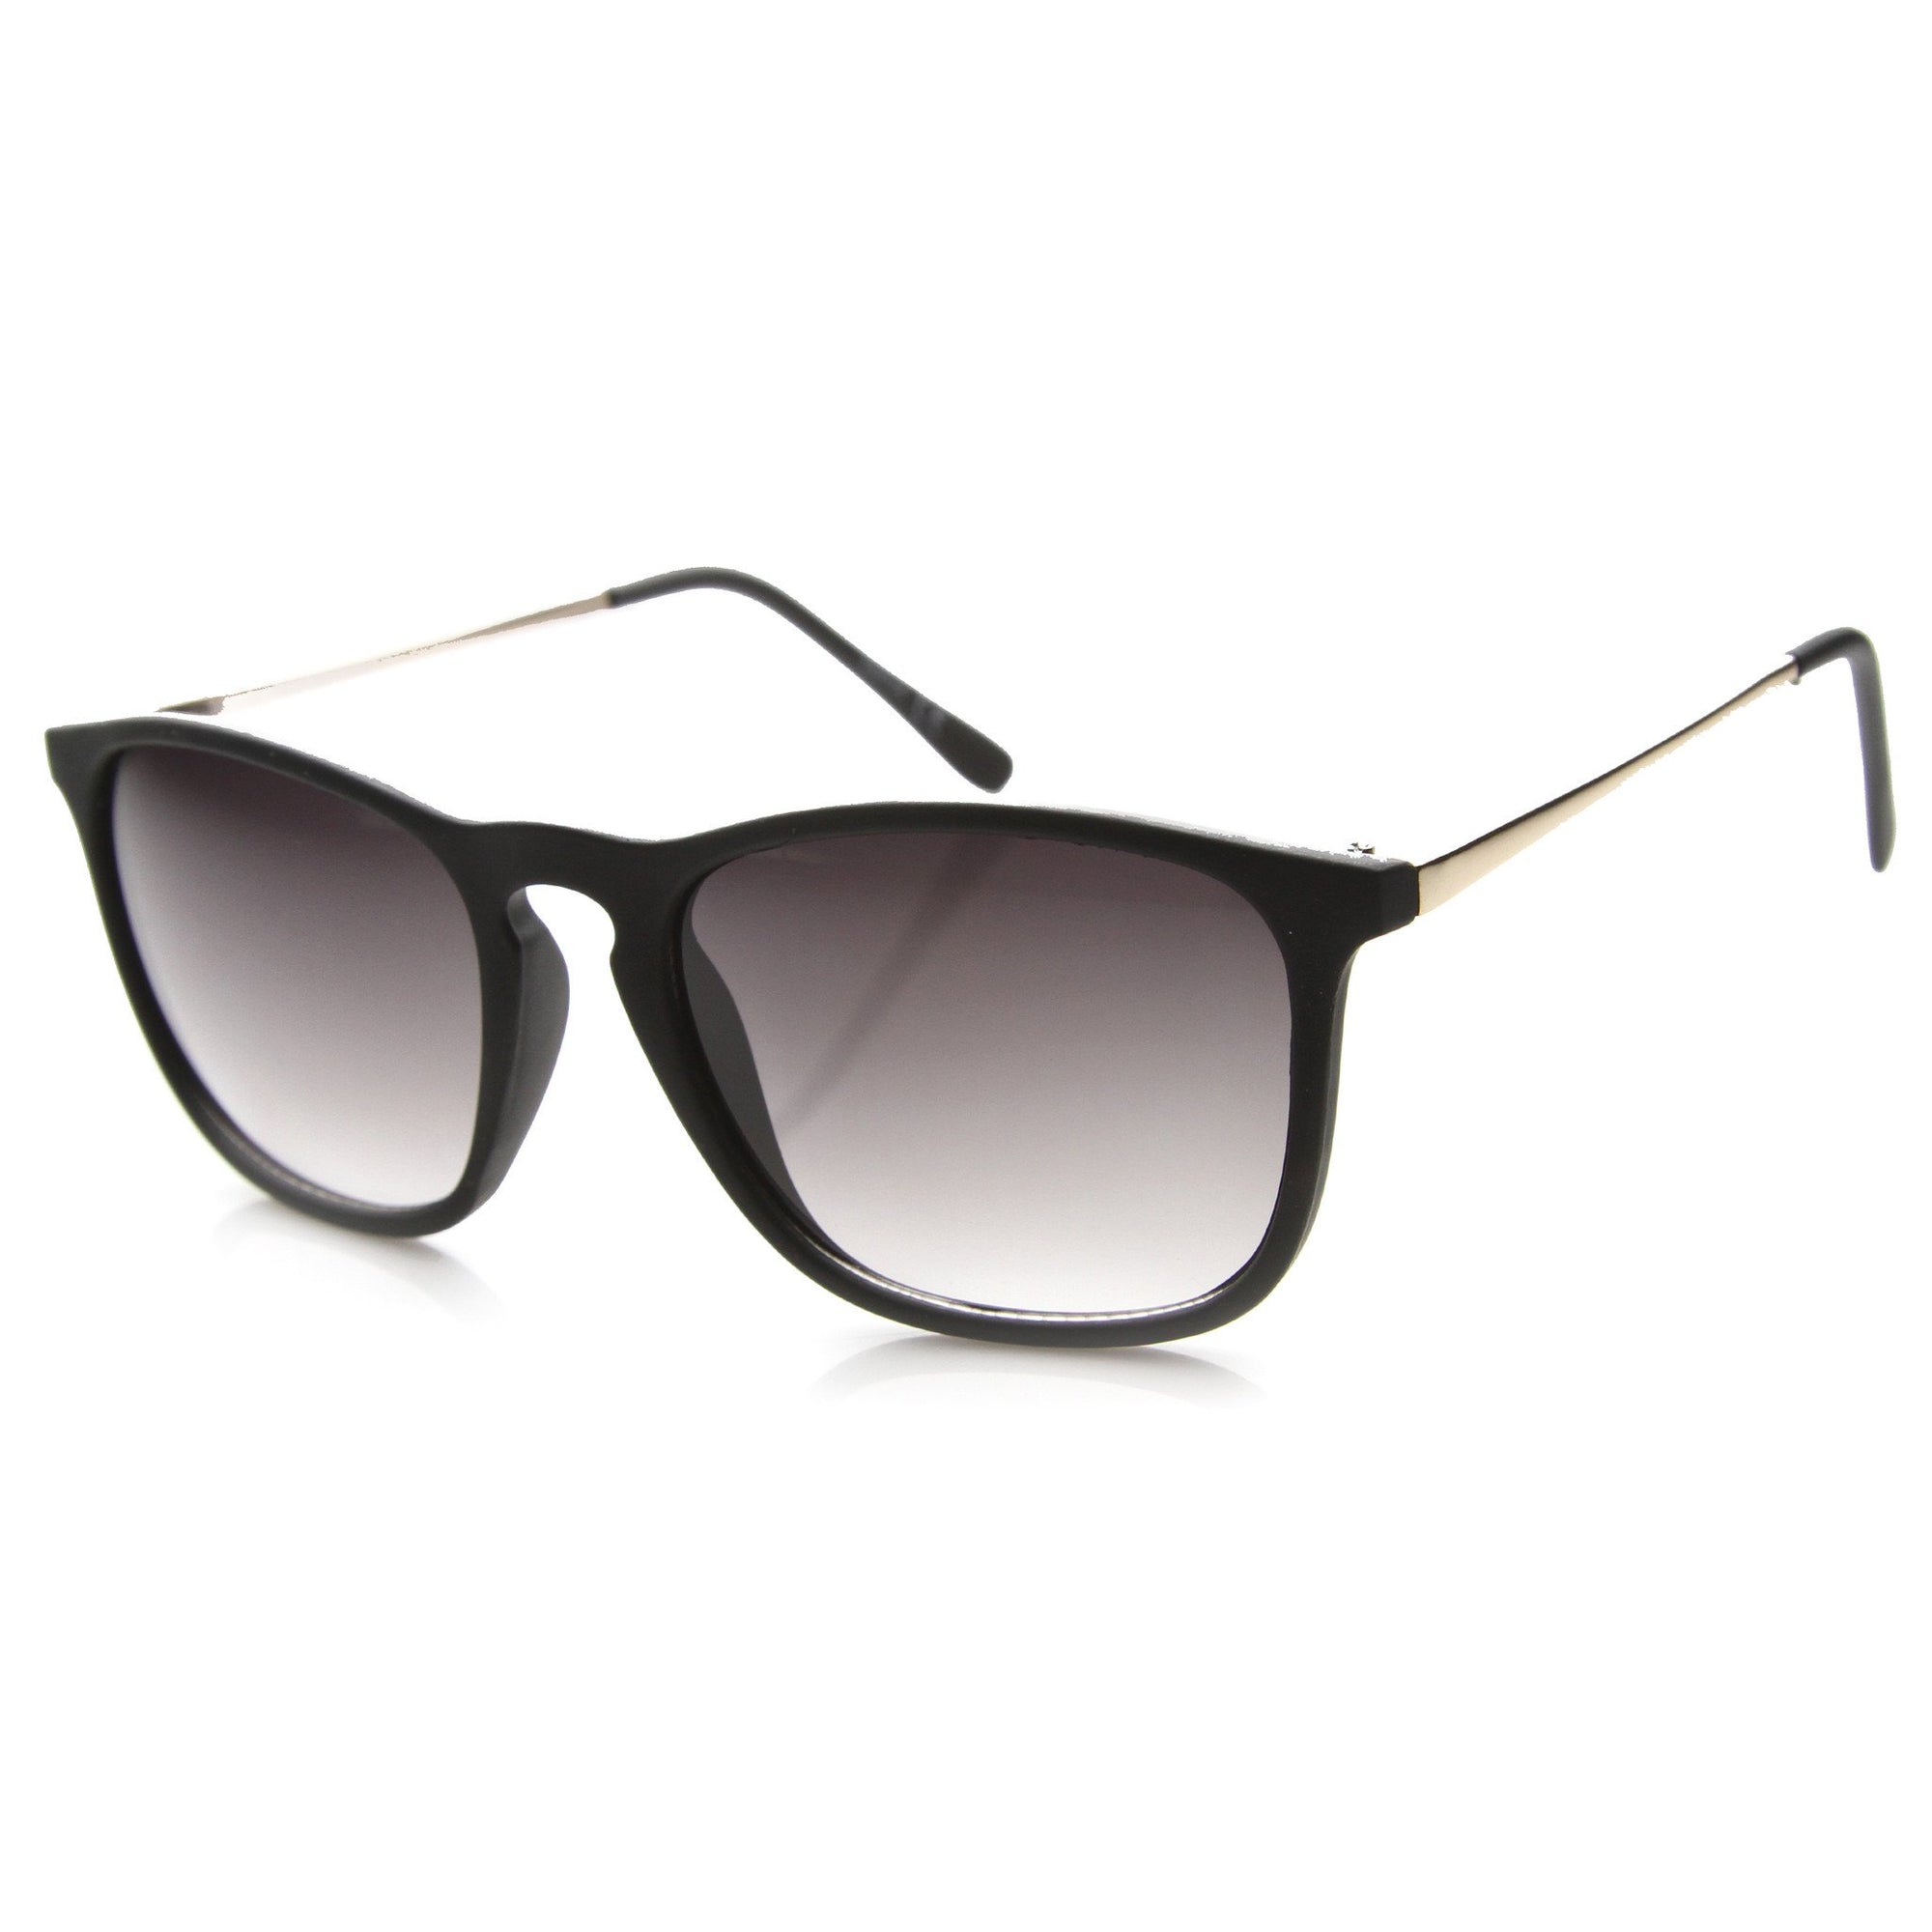 Vintage Inspired Indie Square Metal Temple Sunglasses - zeroUV